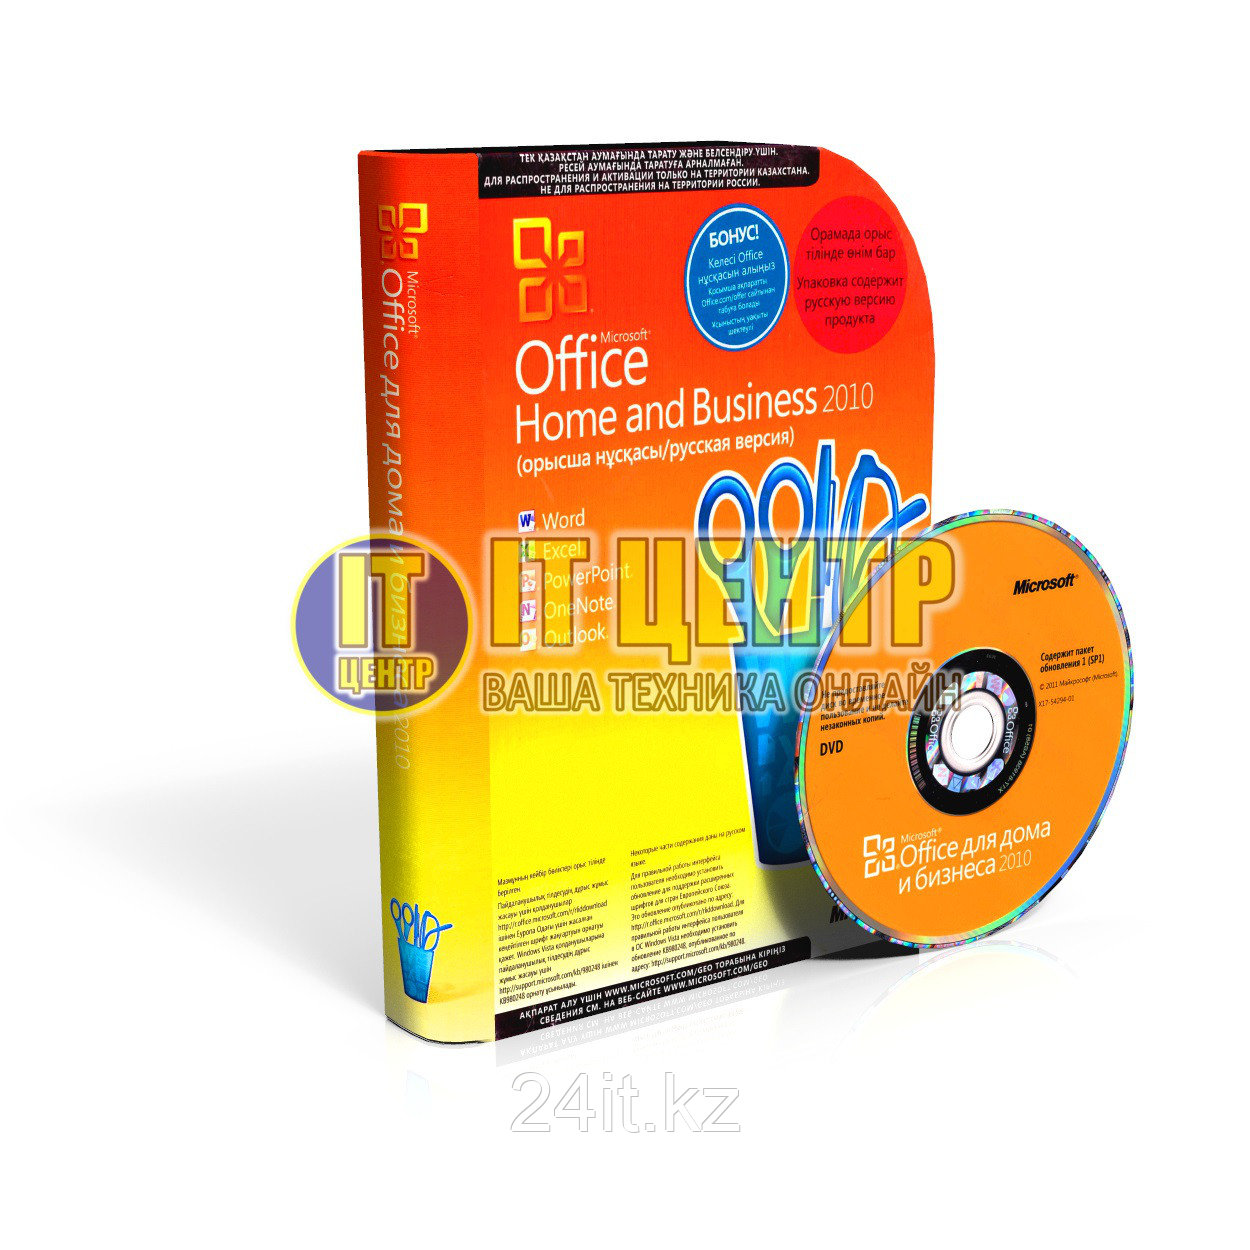 Microsoft Office Home and Business 2010, 32-bit/x64 Russian Kazakhstan Only DVD - фото 1 - id-p35422240